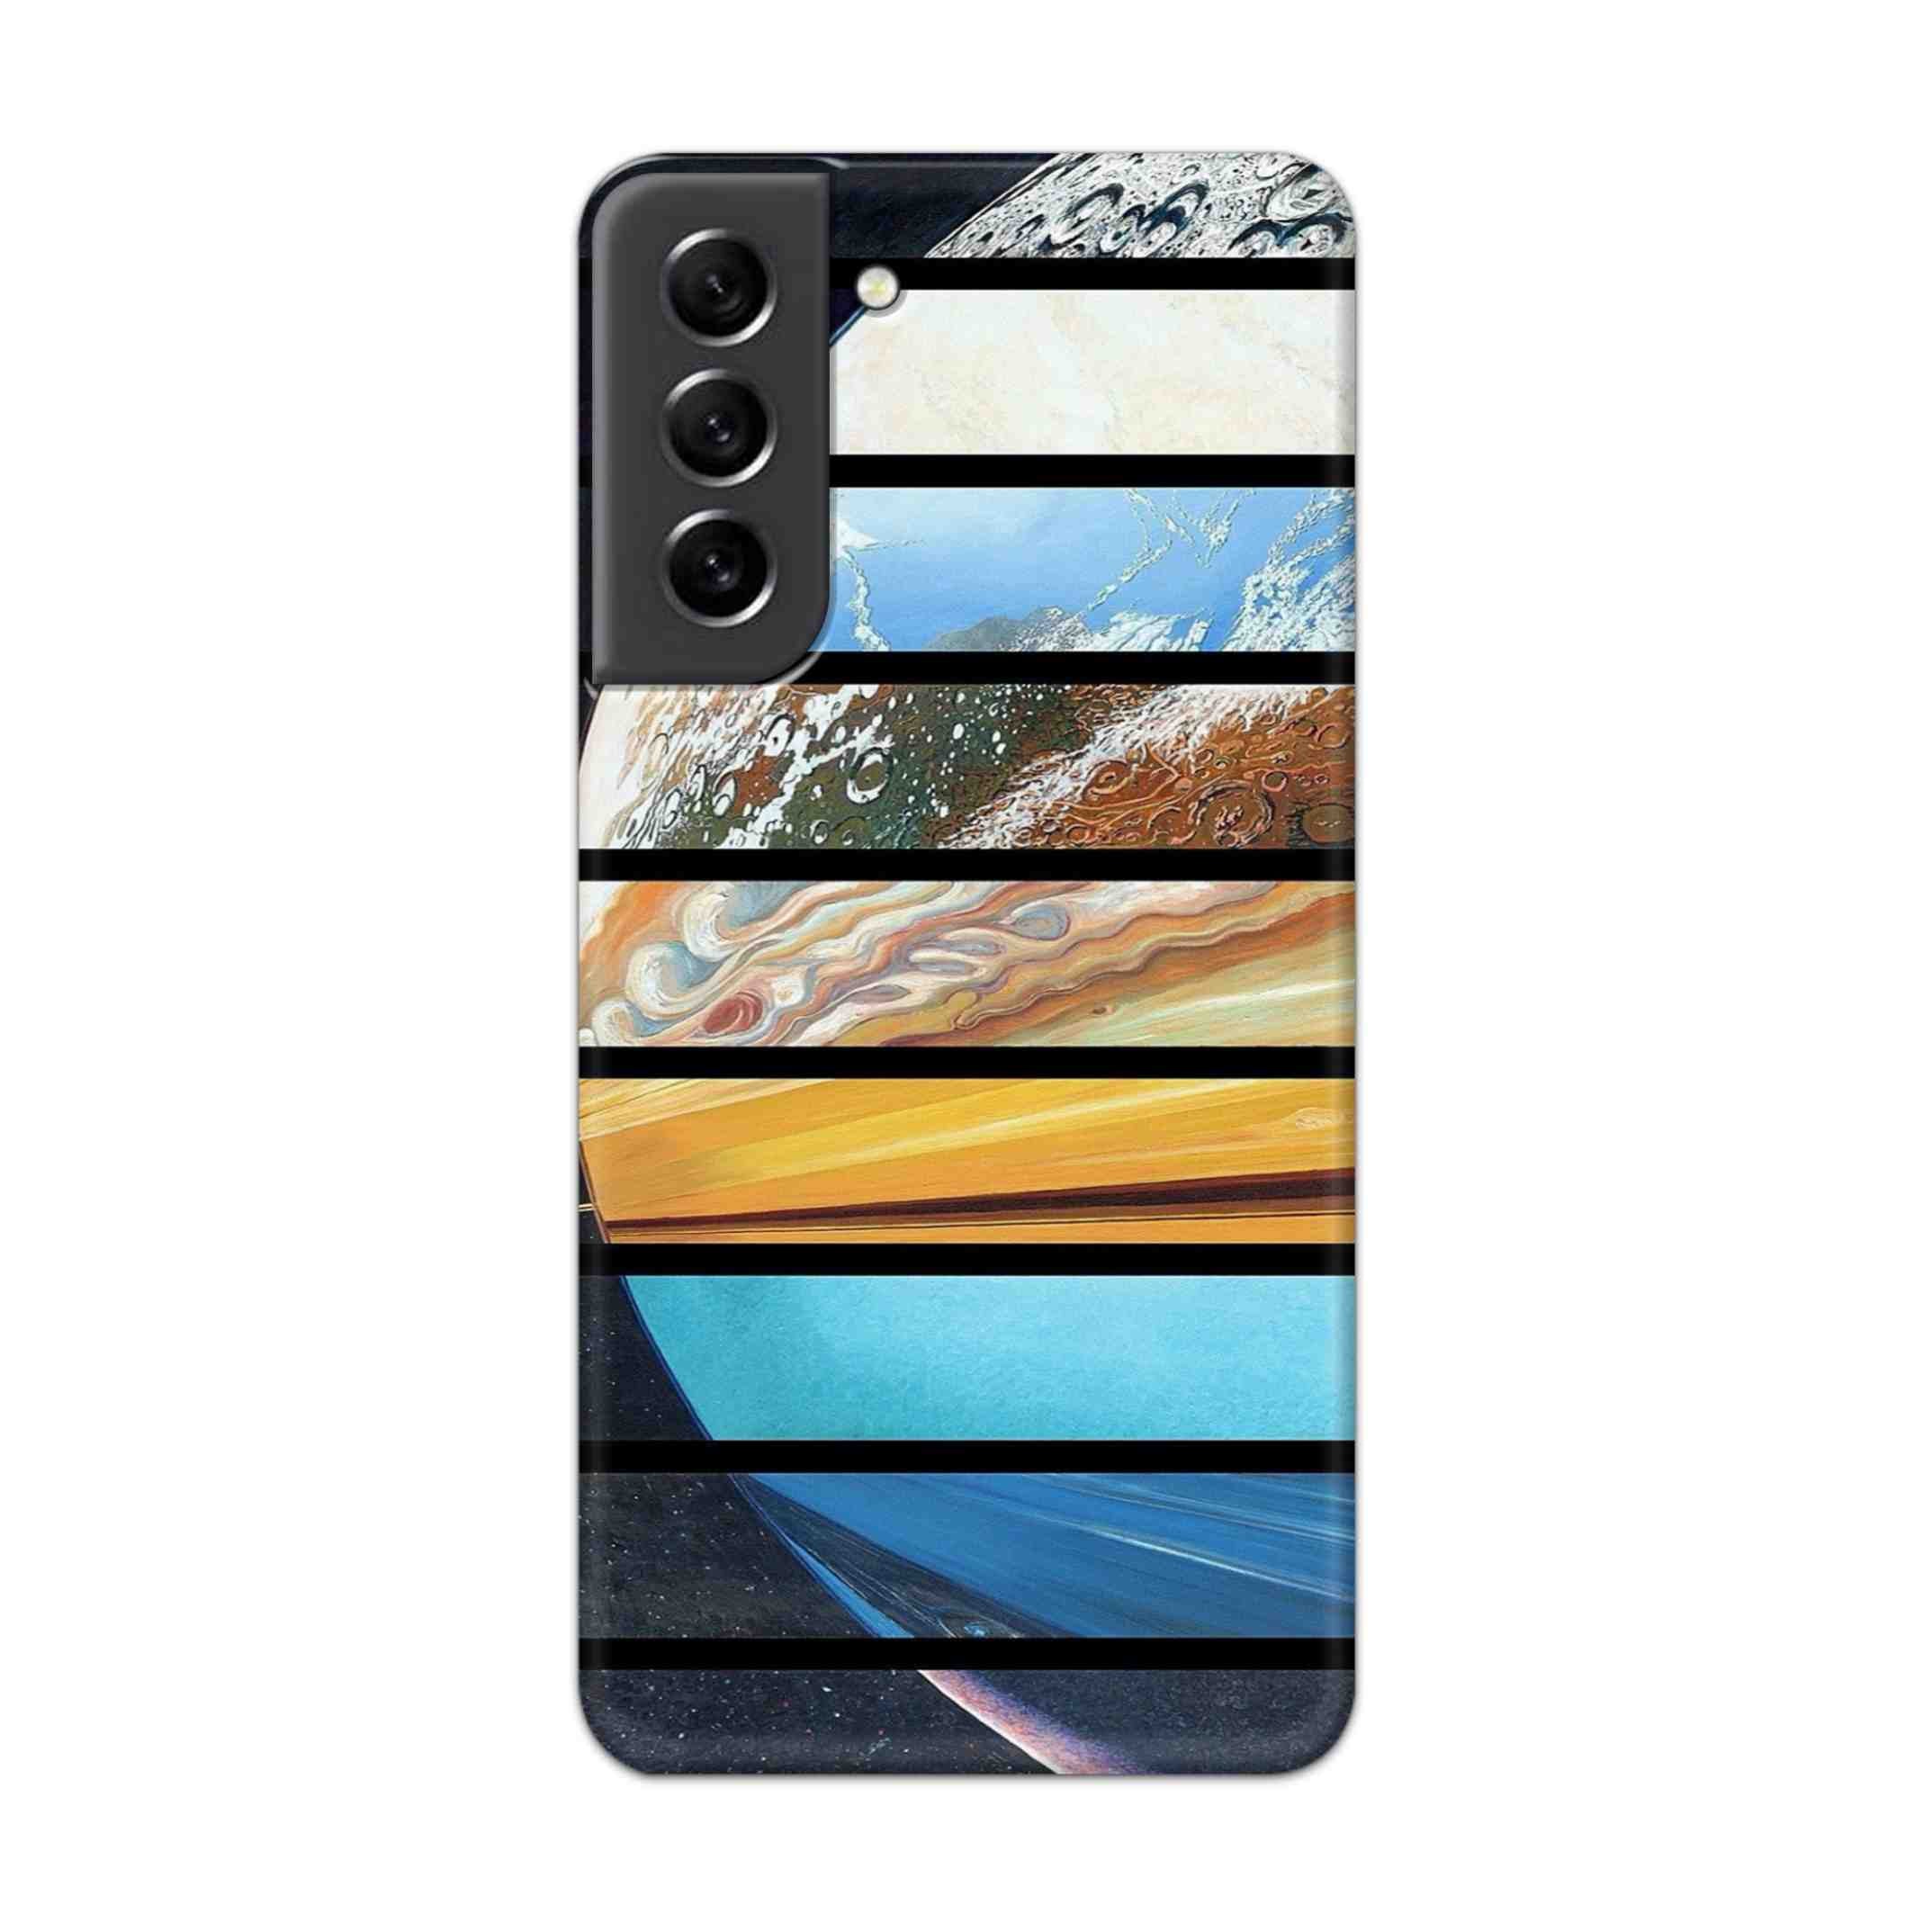 Buy Colourful Earth Hard Back Mobile Phone Case Cover For Samsung S21 FE Online